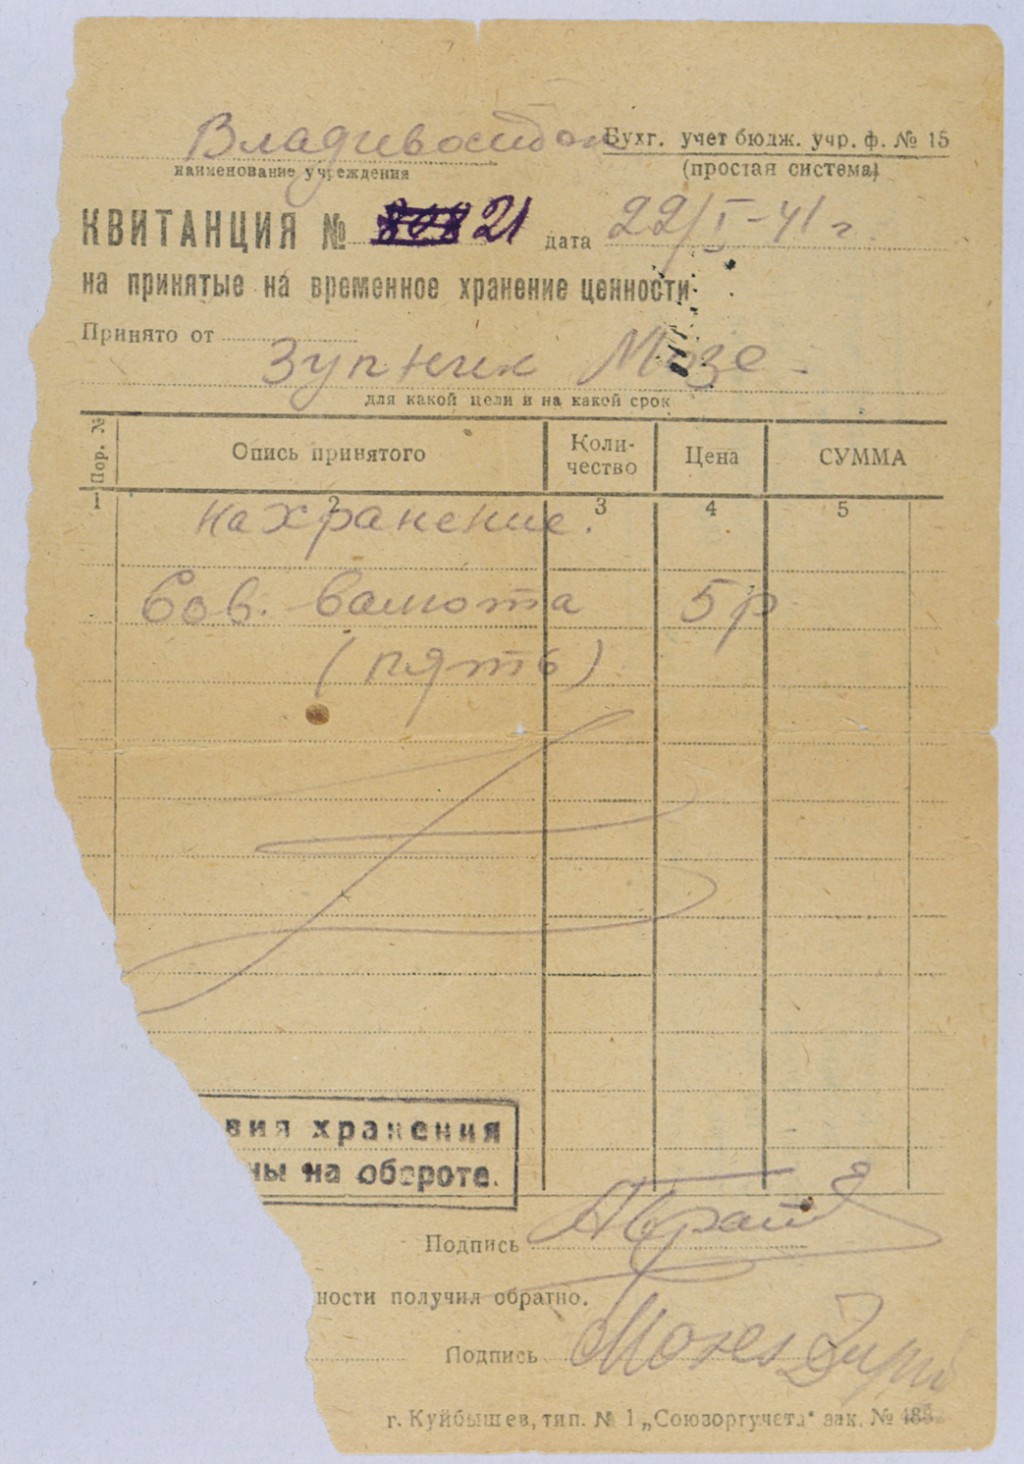 Receipt for items confiscated from Moshe Zupnik [LCID: 2000dfj7]